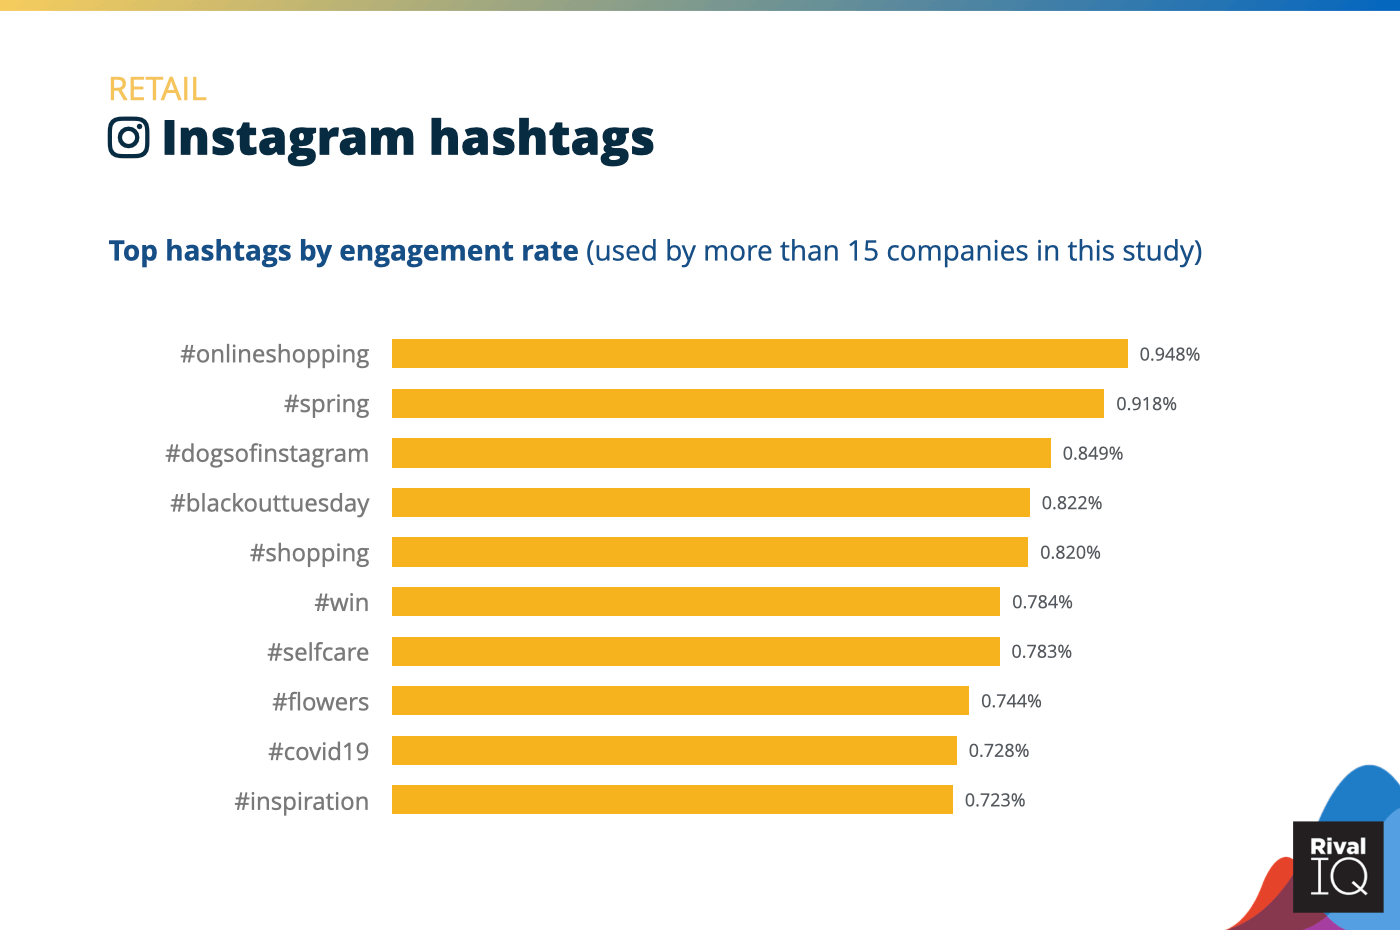 Chart of Top Instagram hashtags by engagement rate, Retail